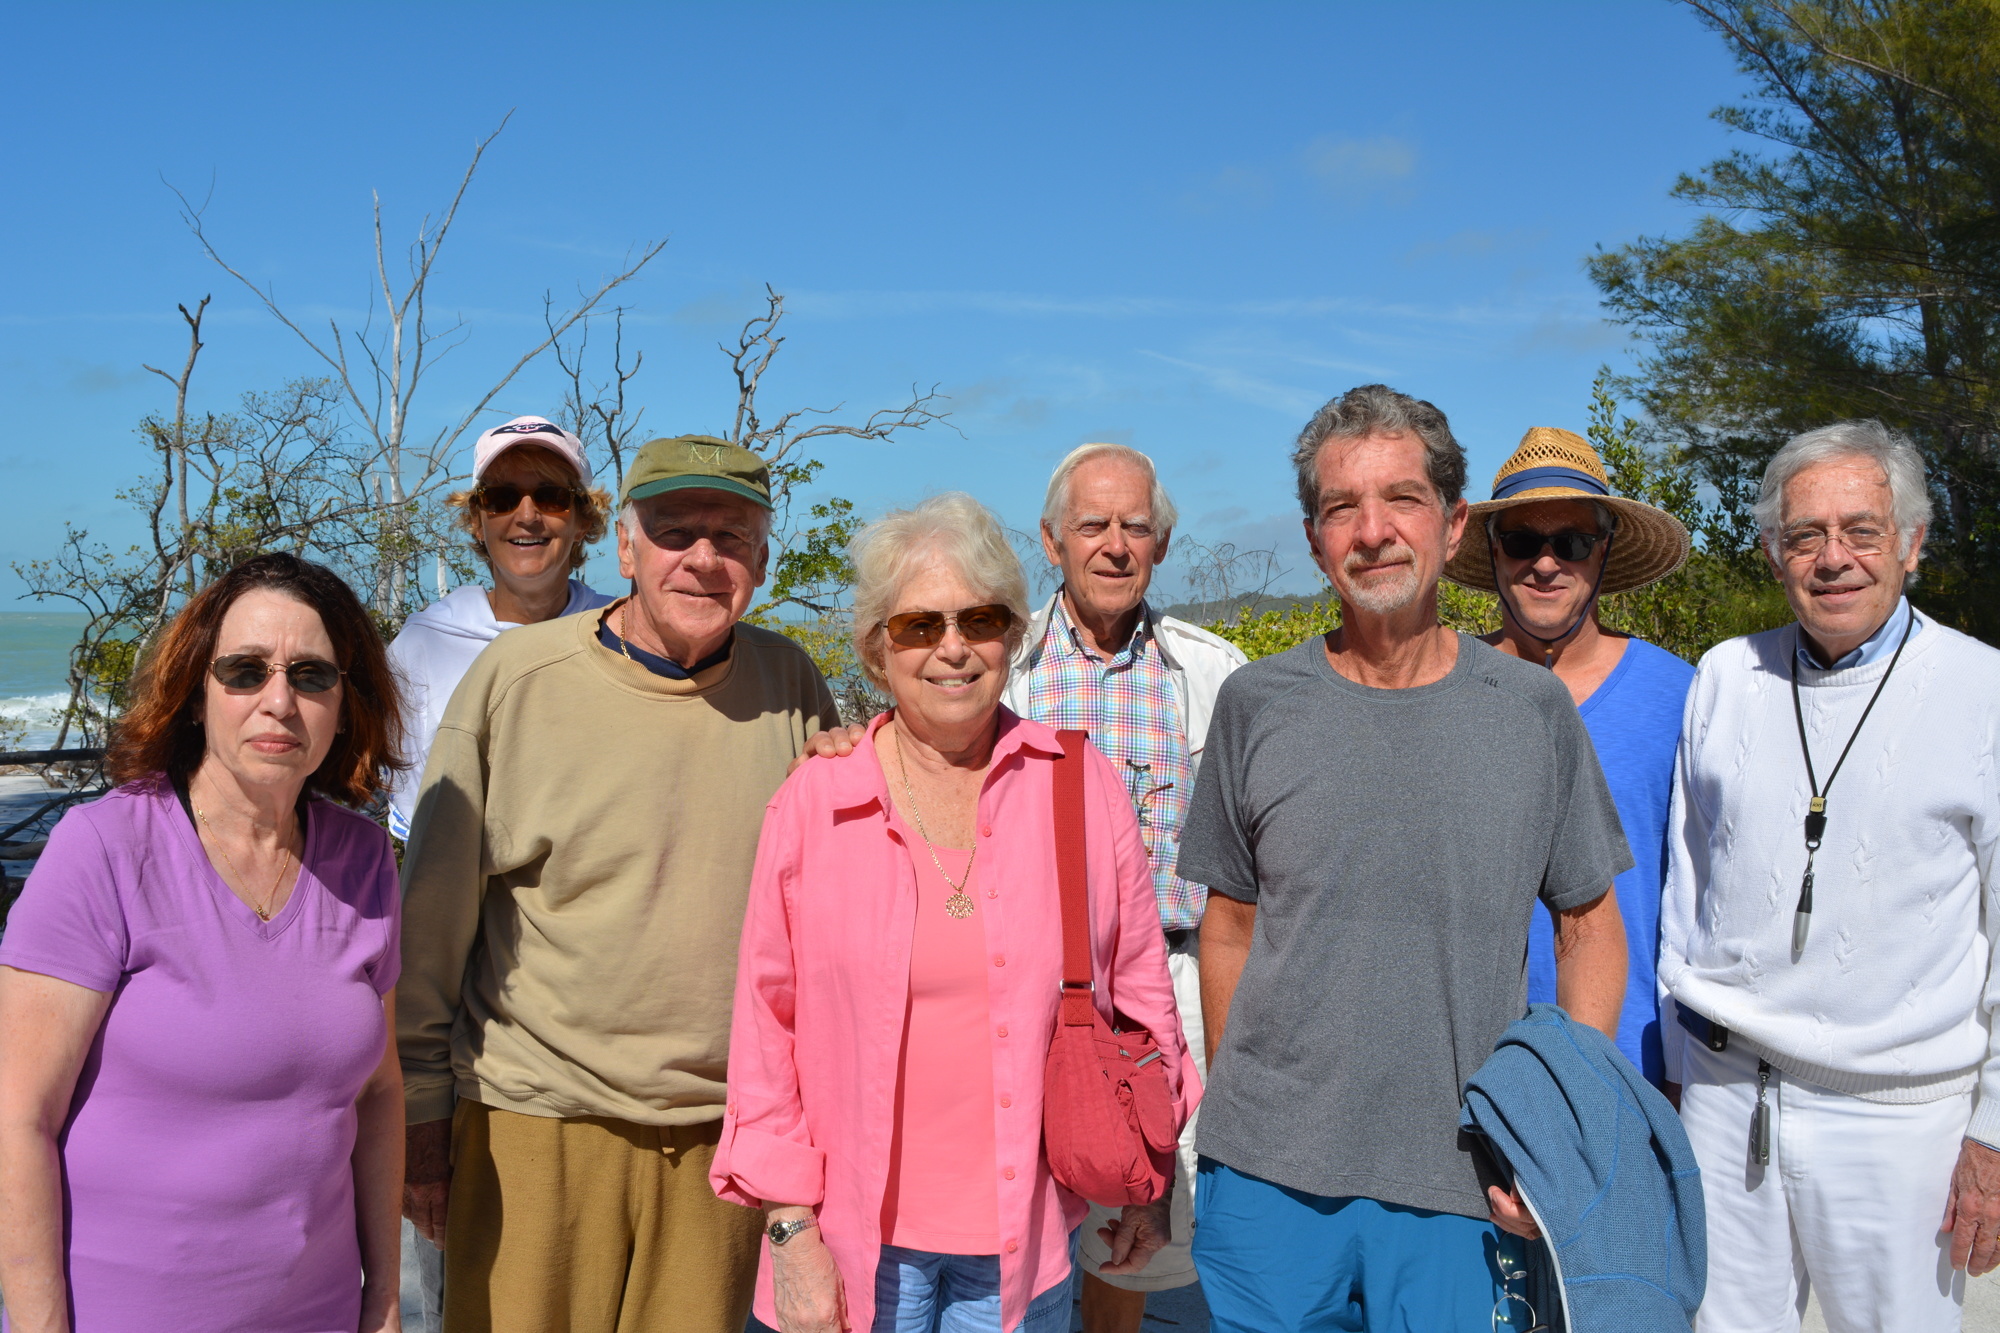 Members of LBK North, along with Town Commissioner Ed Zunz, surveyed the scene at Beer Can Island Wednesday.